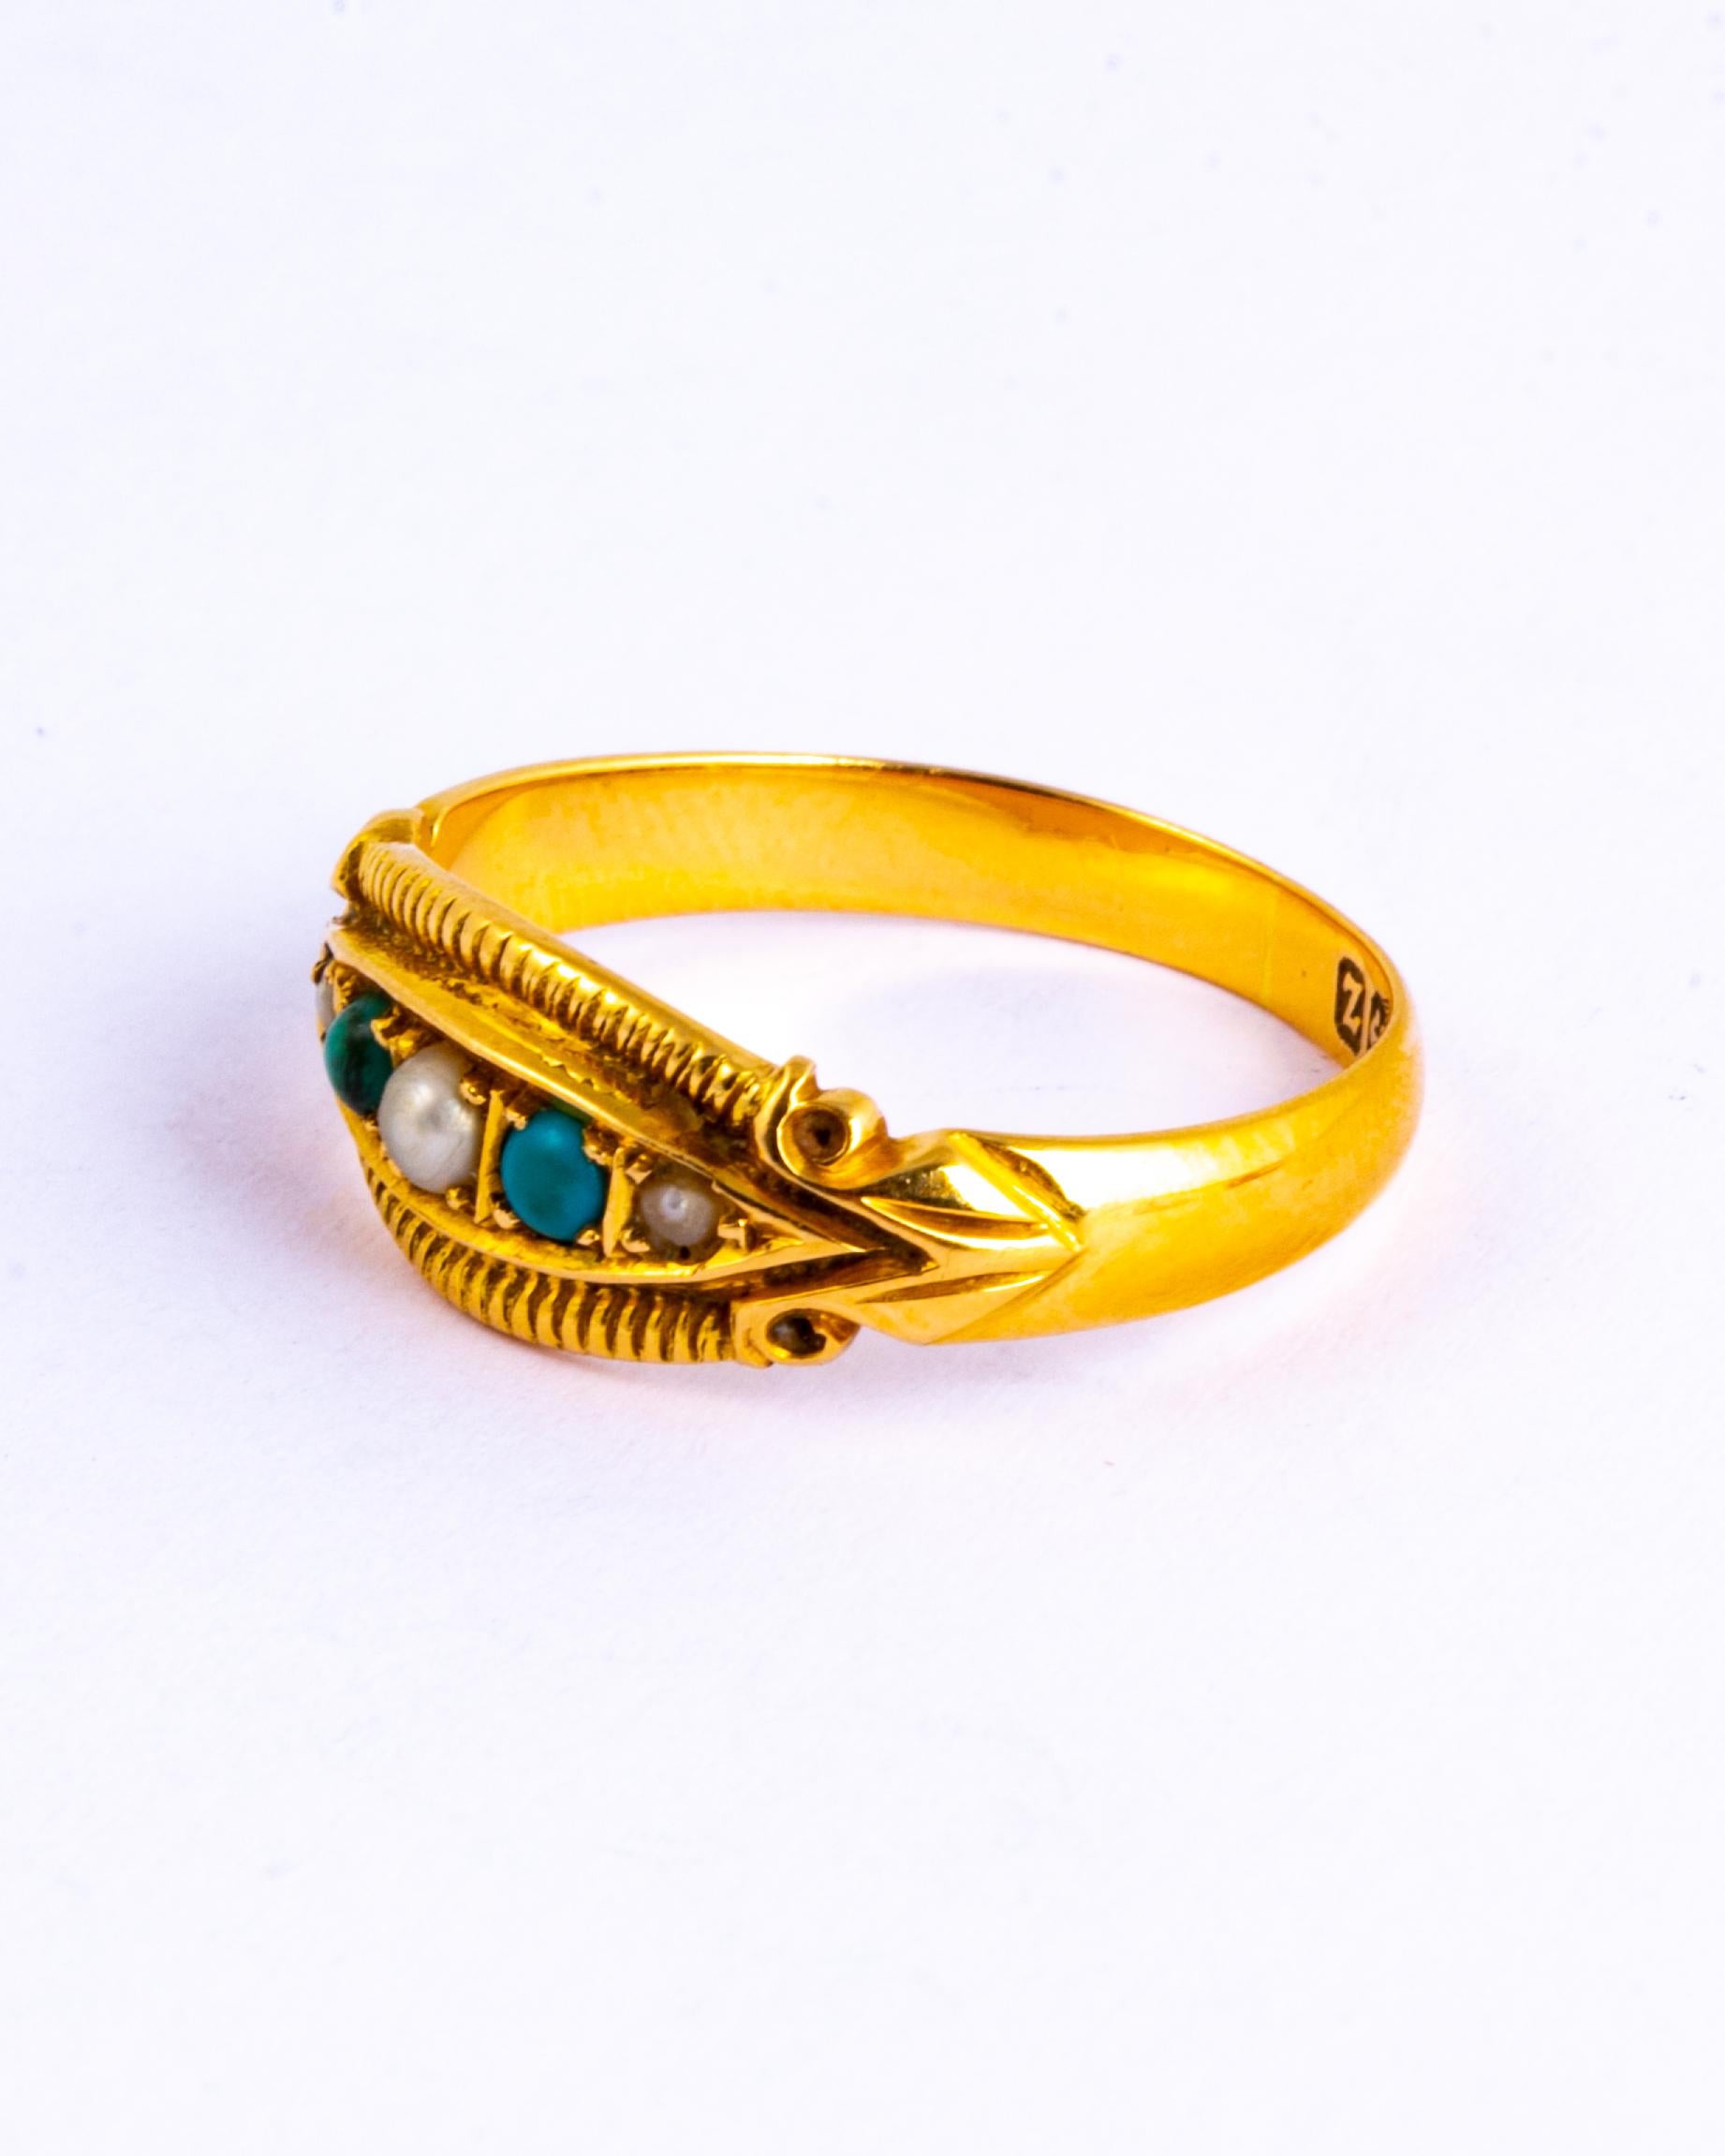 This ring holds two turquoise stones and three pearls. The stones are set in a boat shape setting which has heavily engraved detail around the frame and scrolled shoulders. Modelled in 18 carat yellow gold and made in Birmingham, England.

Ring